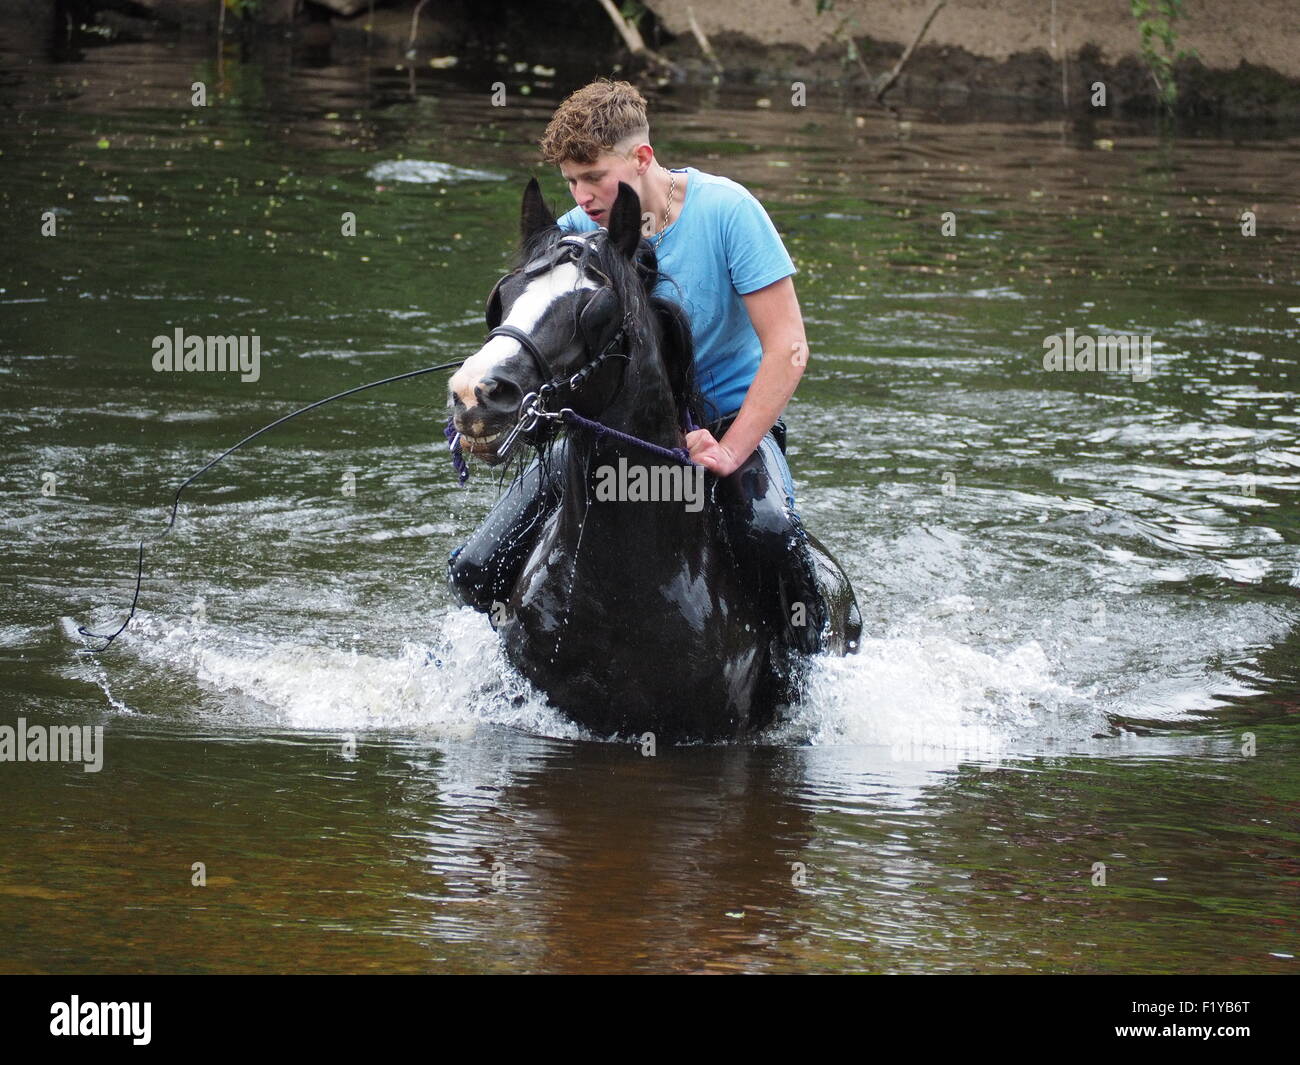 wet young man in blue T-shirt riding horse in River Eden at the famous ...